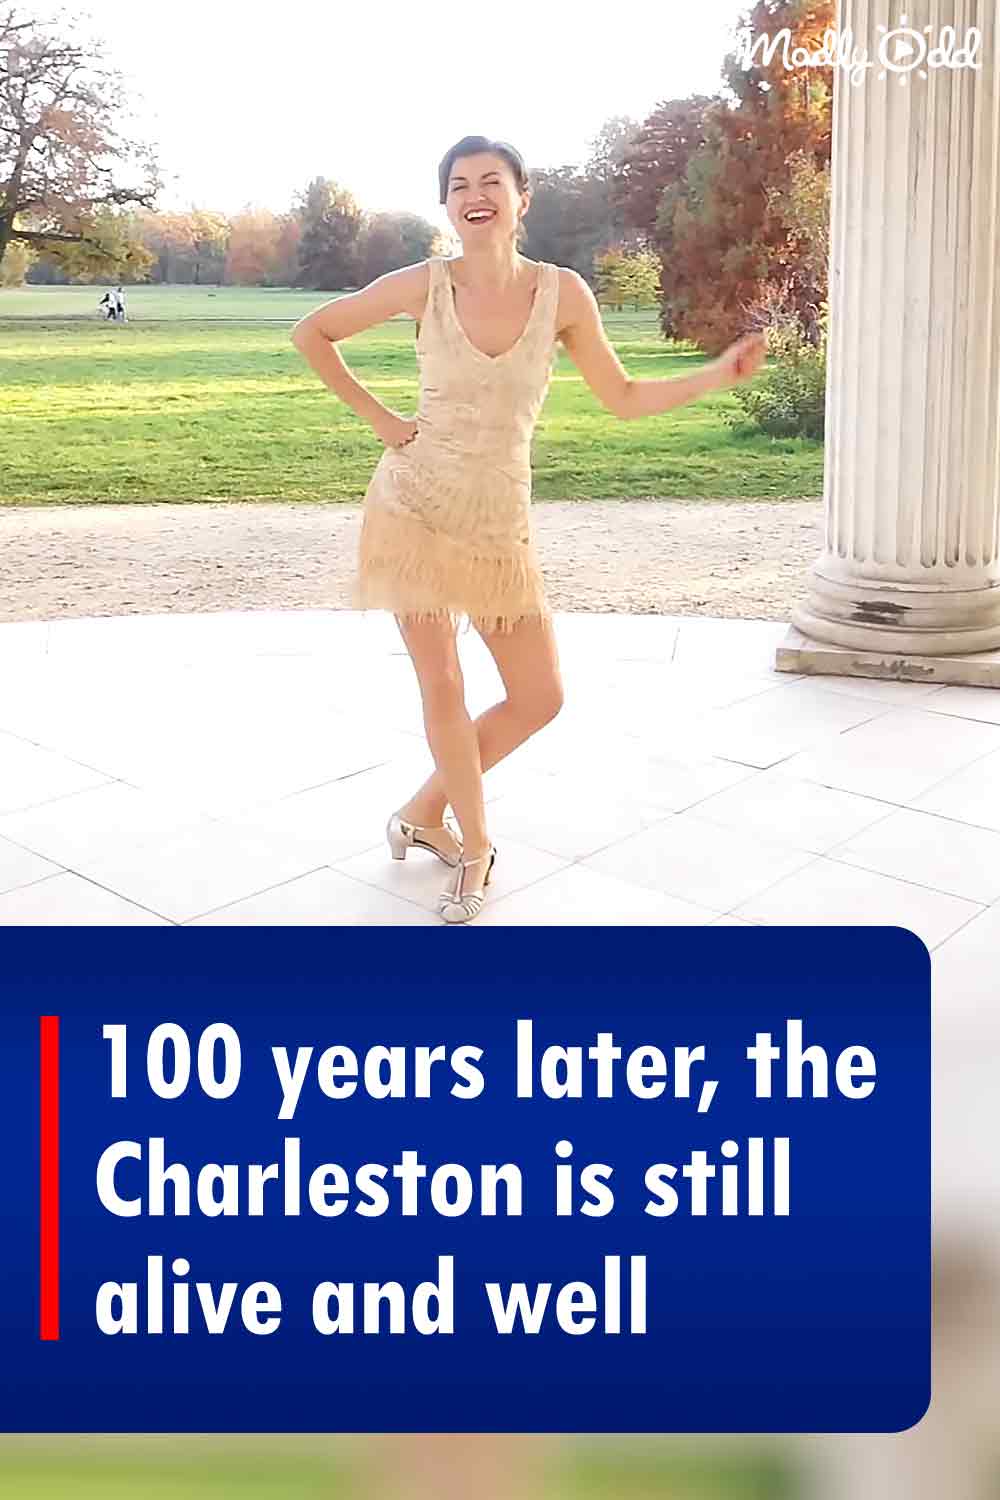 100 years later, the Charleston is still alive and well